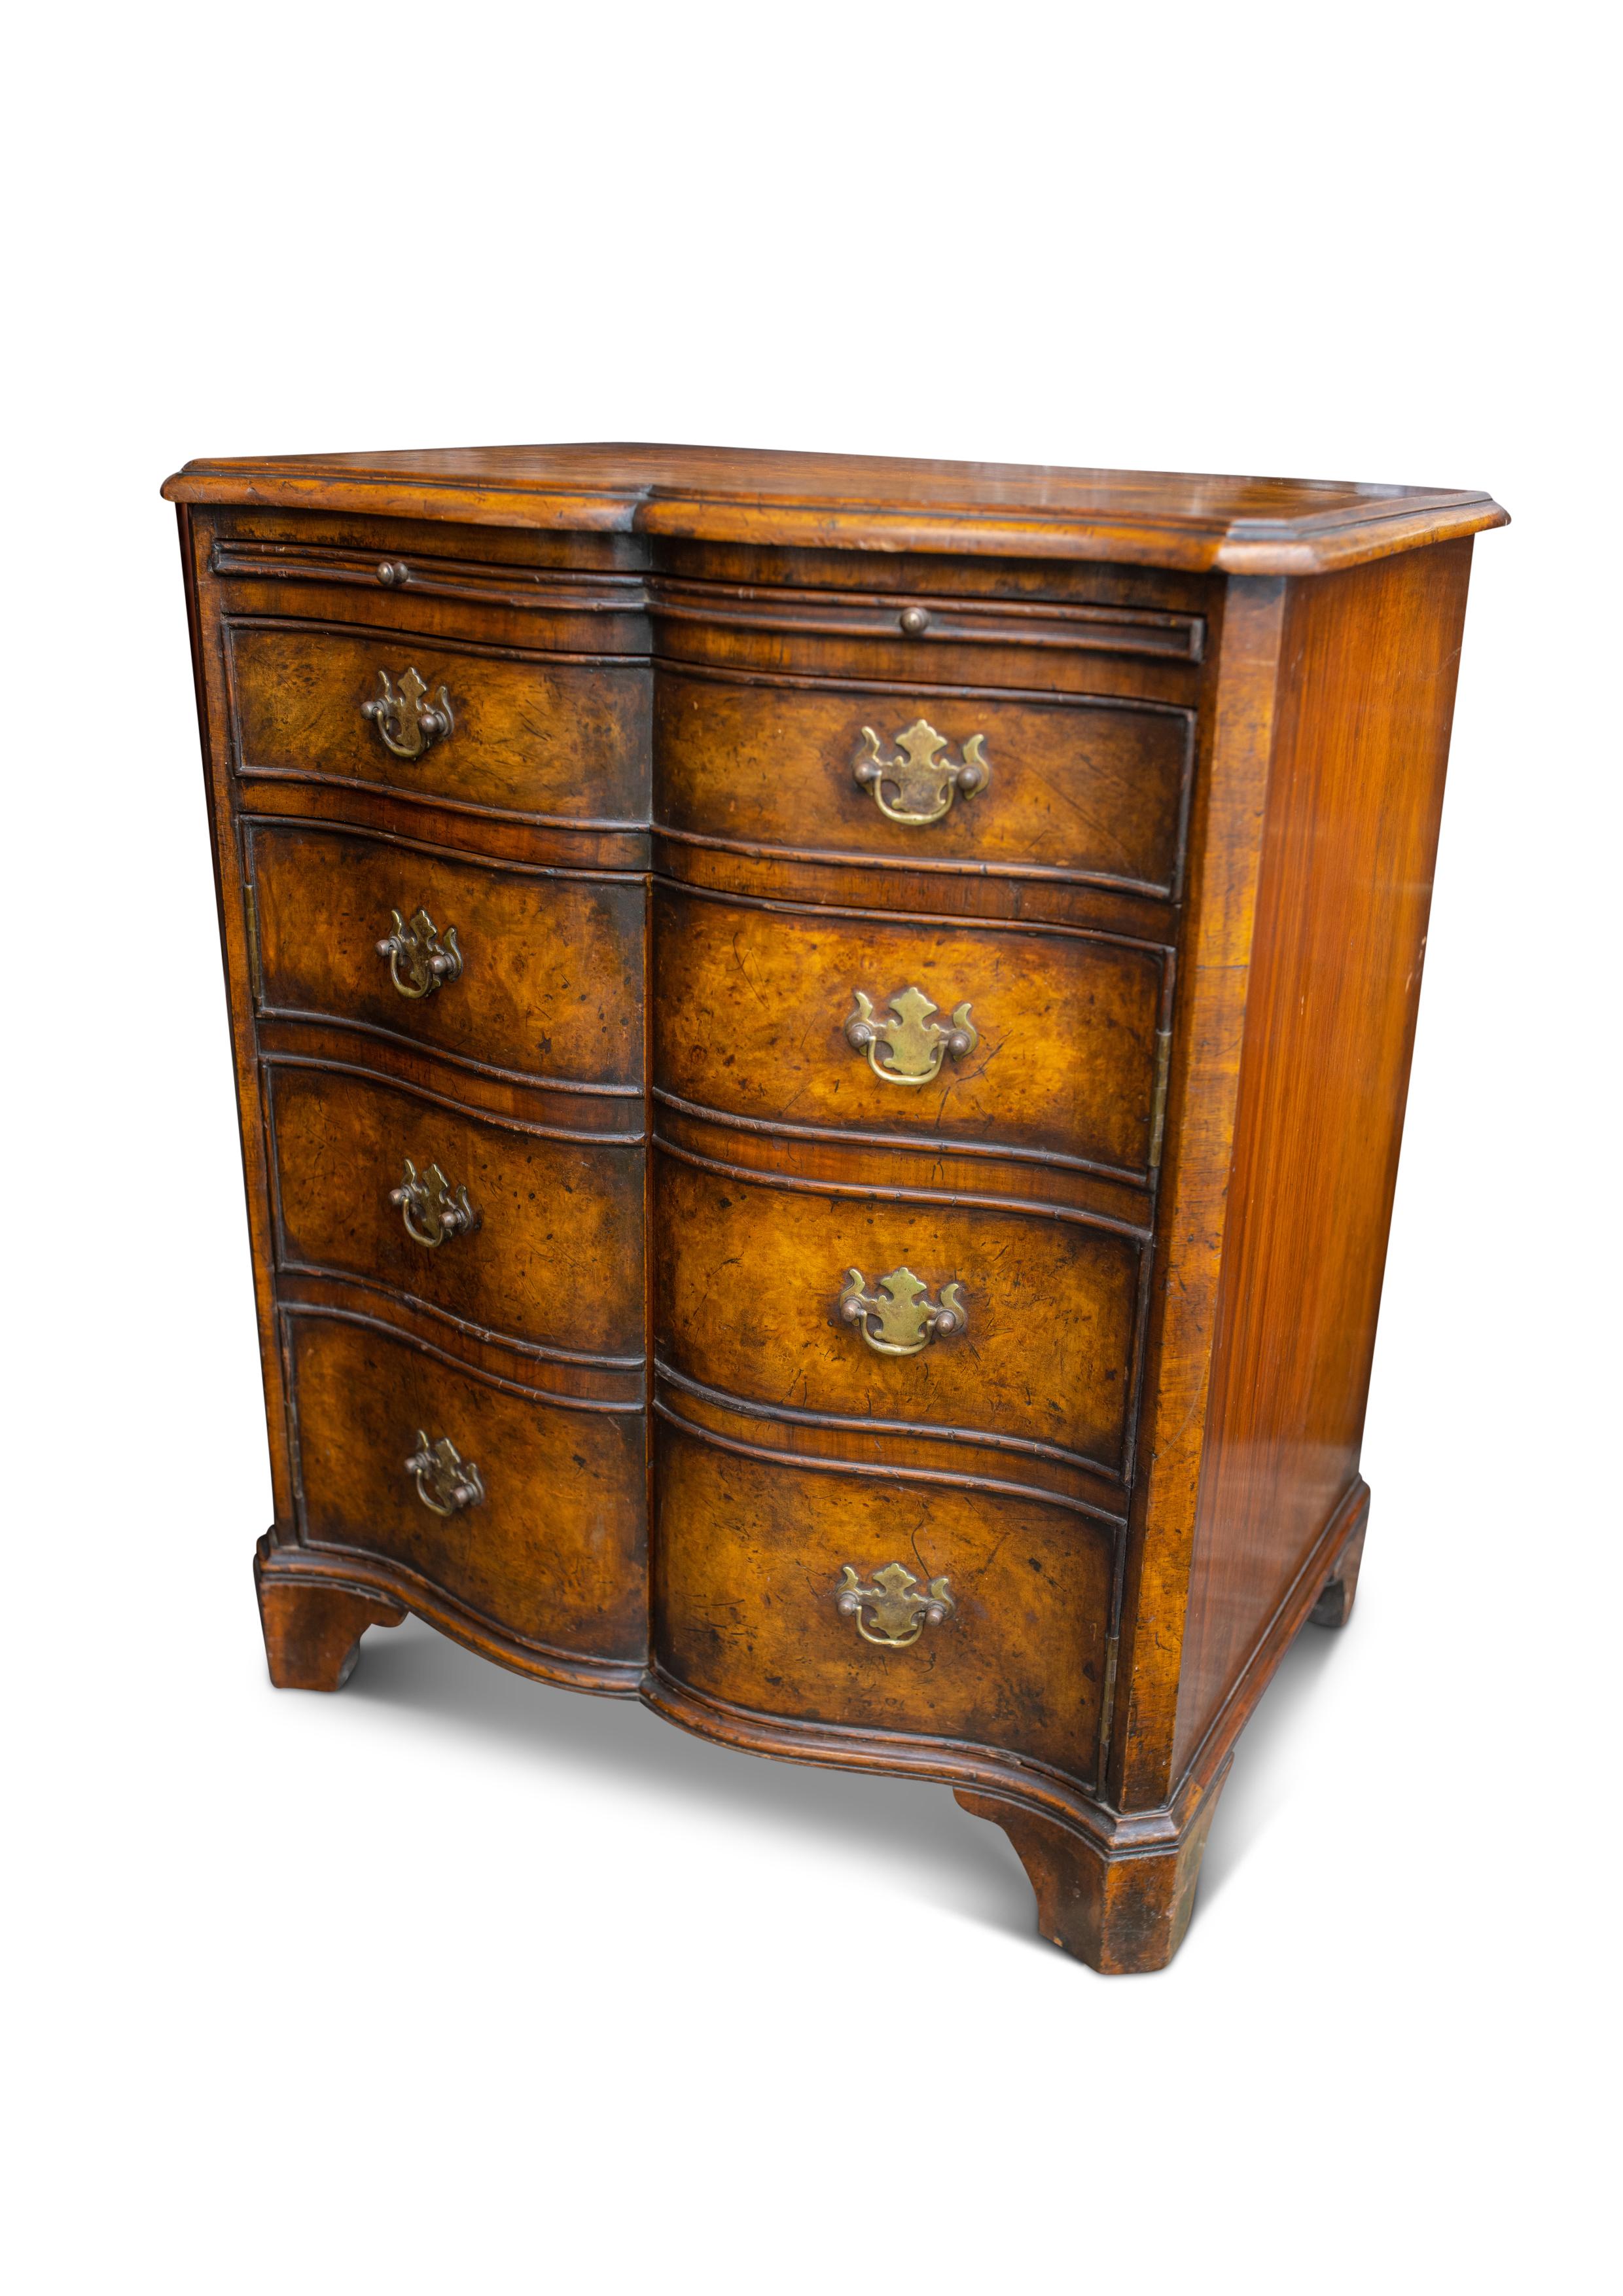 Burr Walnut Reverse Serpentine Two Door Batchelor's Cabinet With Single Drawer & Brass Bat Wing Handles in the Georgian Style.

Would work as a great lamp table, a solo nightstand or a petite drinks cabinet. 
